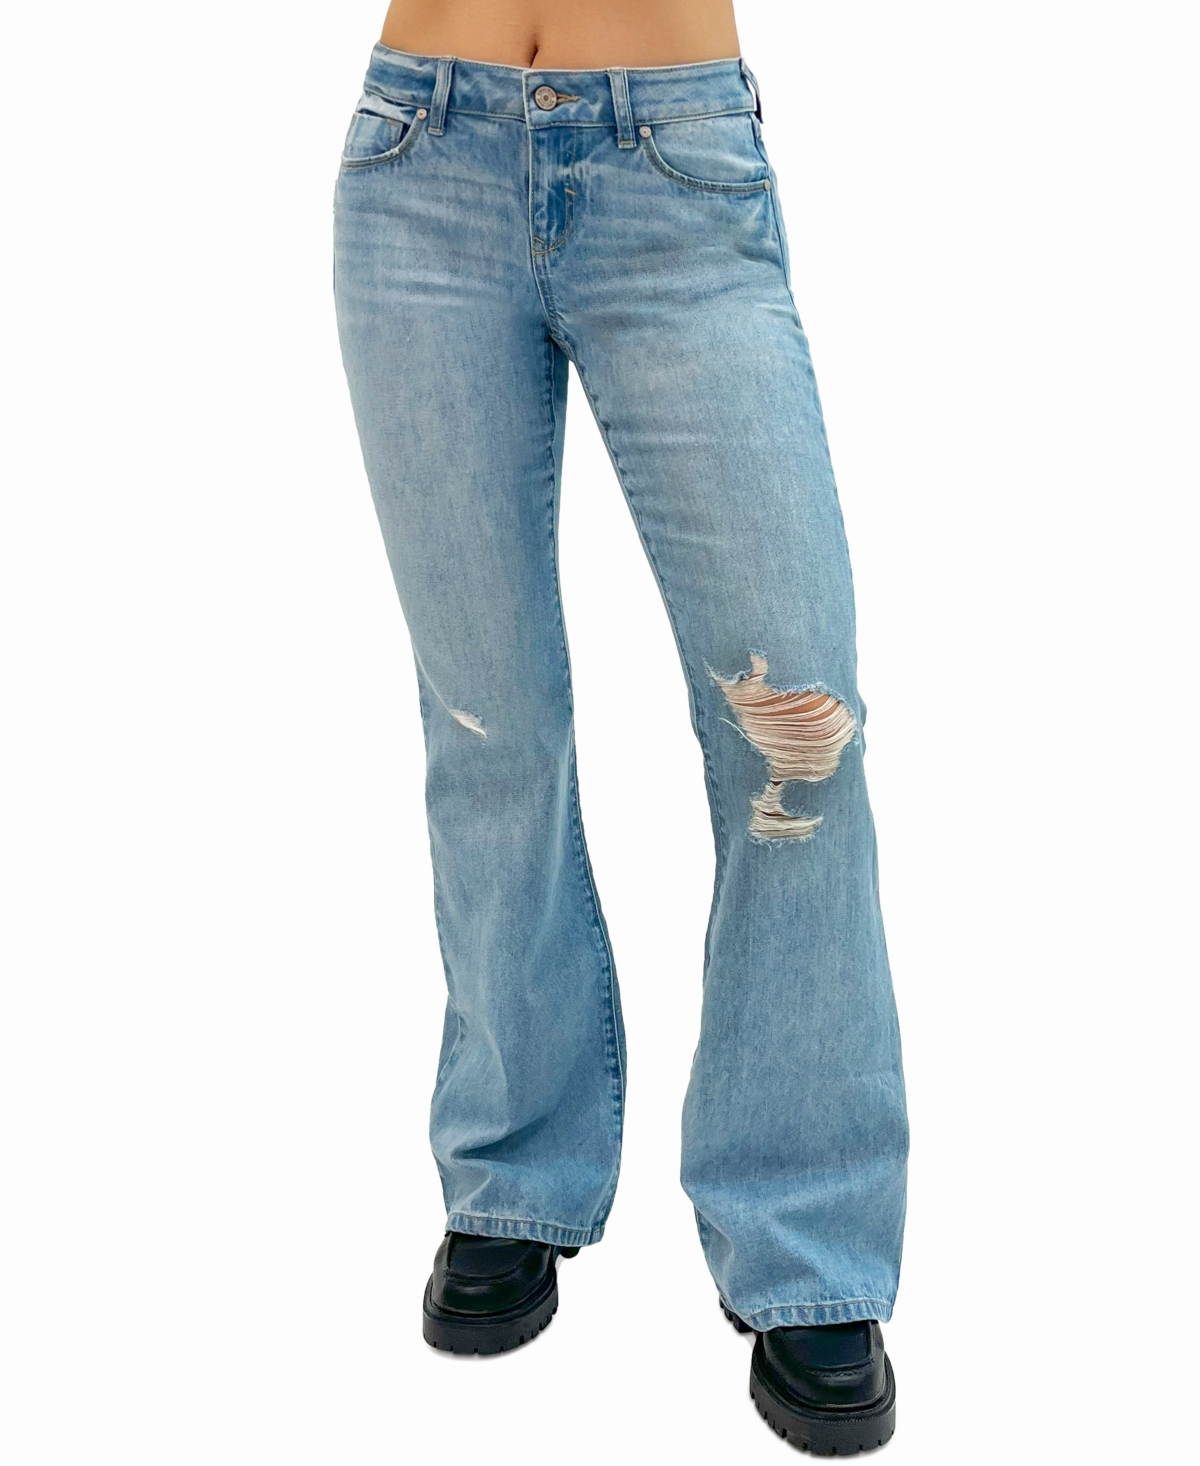 Women's Low-Rise Distressed Flare Jeans - Medium Wash